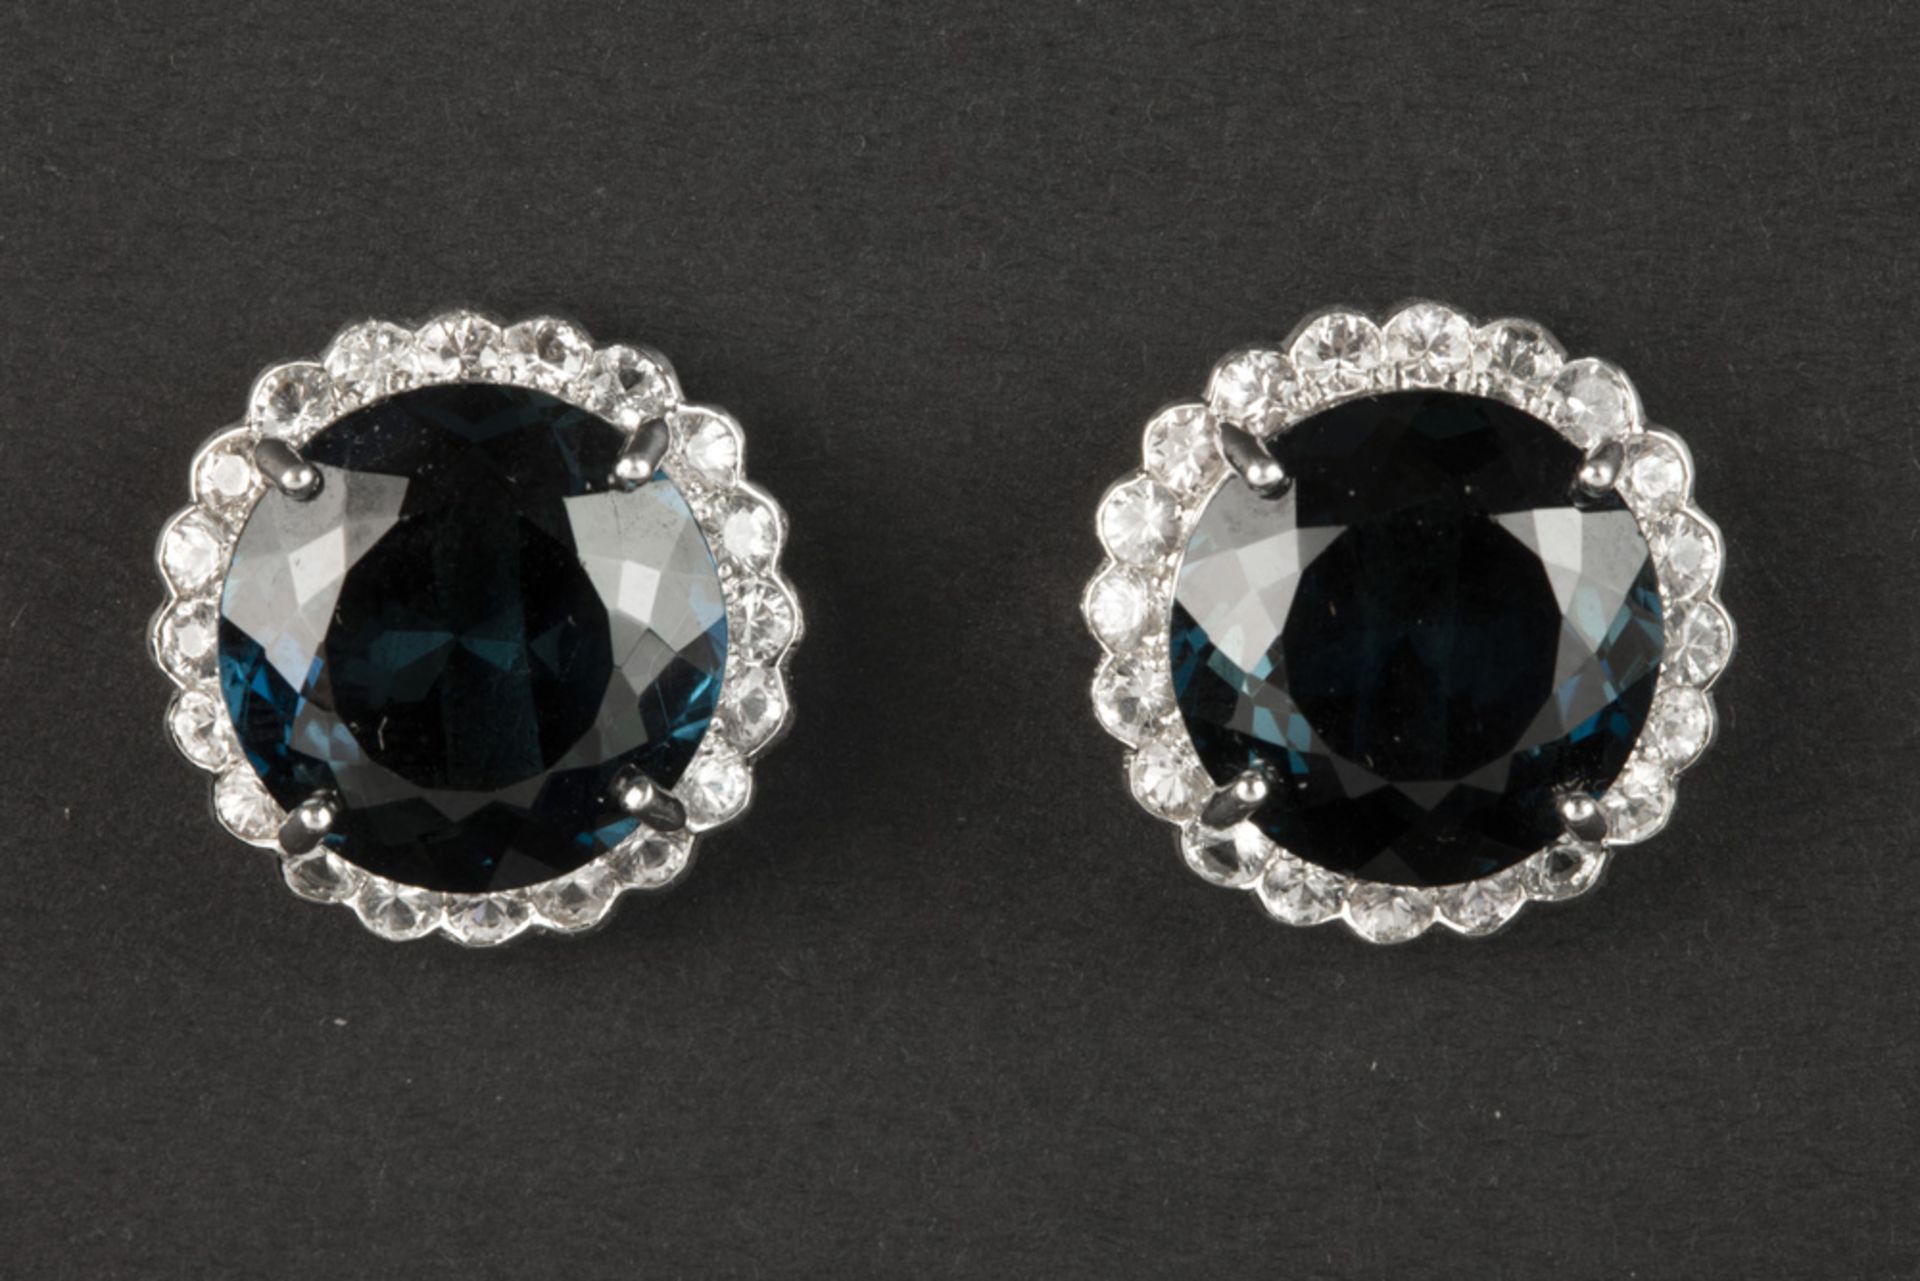 pair of round earrings in white gold (18 carat) with at least 21 carat of topaz with "London blue"